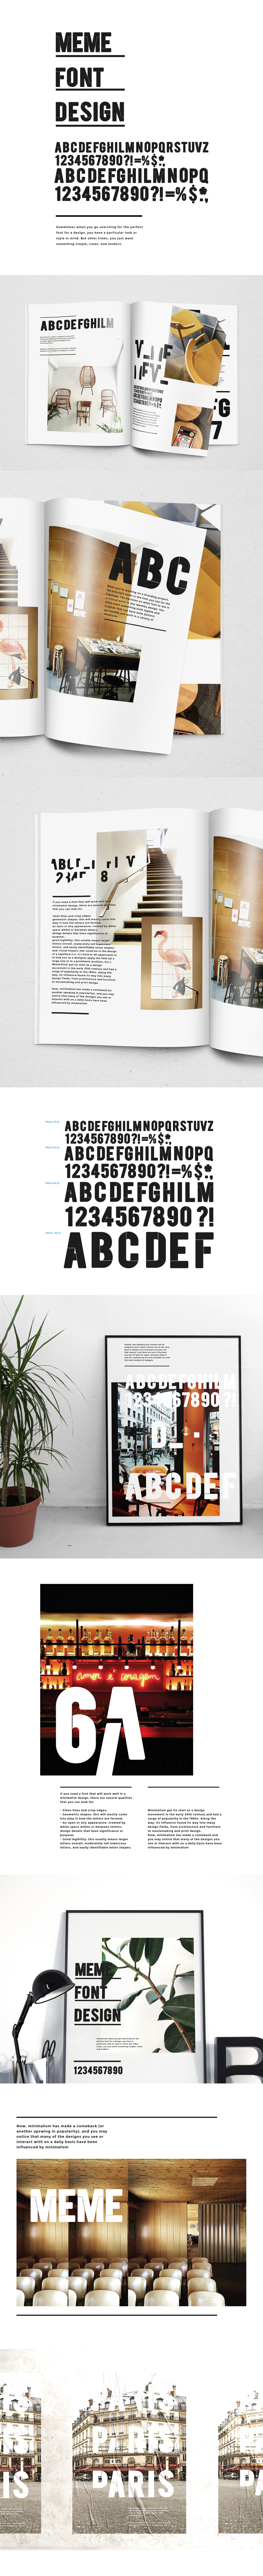 type fonts Typeface design ArtDirection font poster editorial creative identity